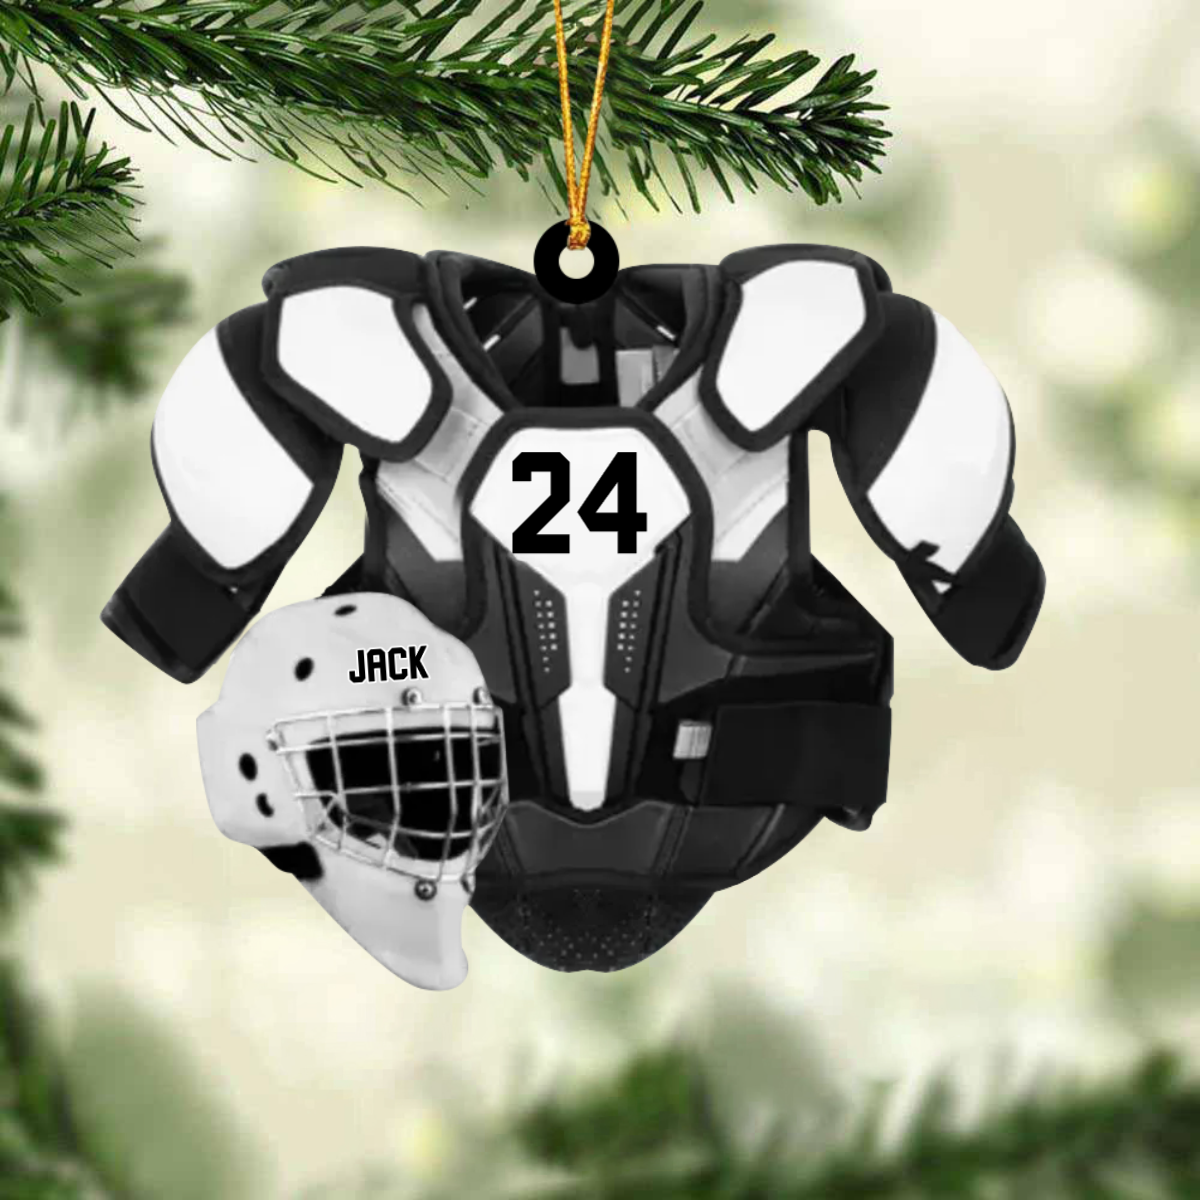 Personalized Ice Hockey Helmet and Shoulder Pads Christmas Ornament